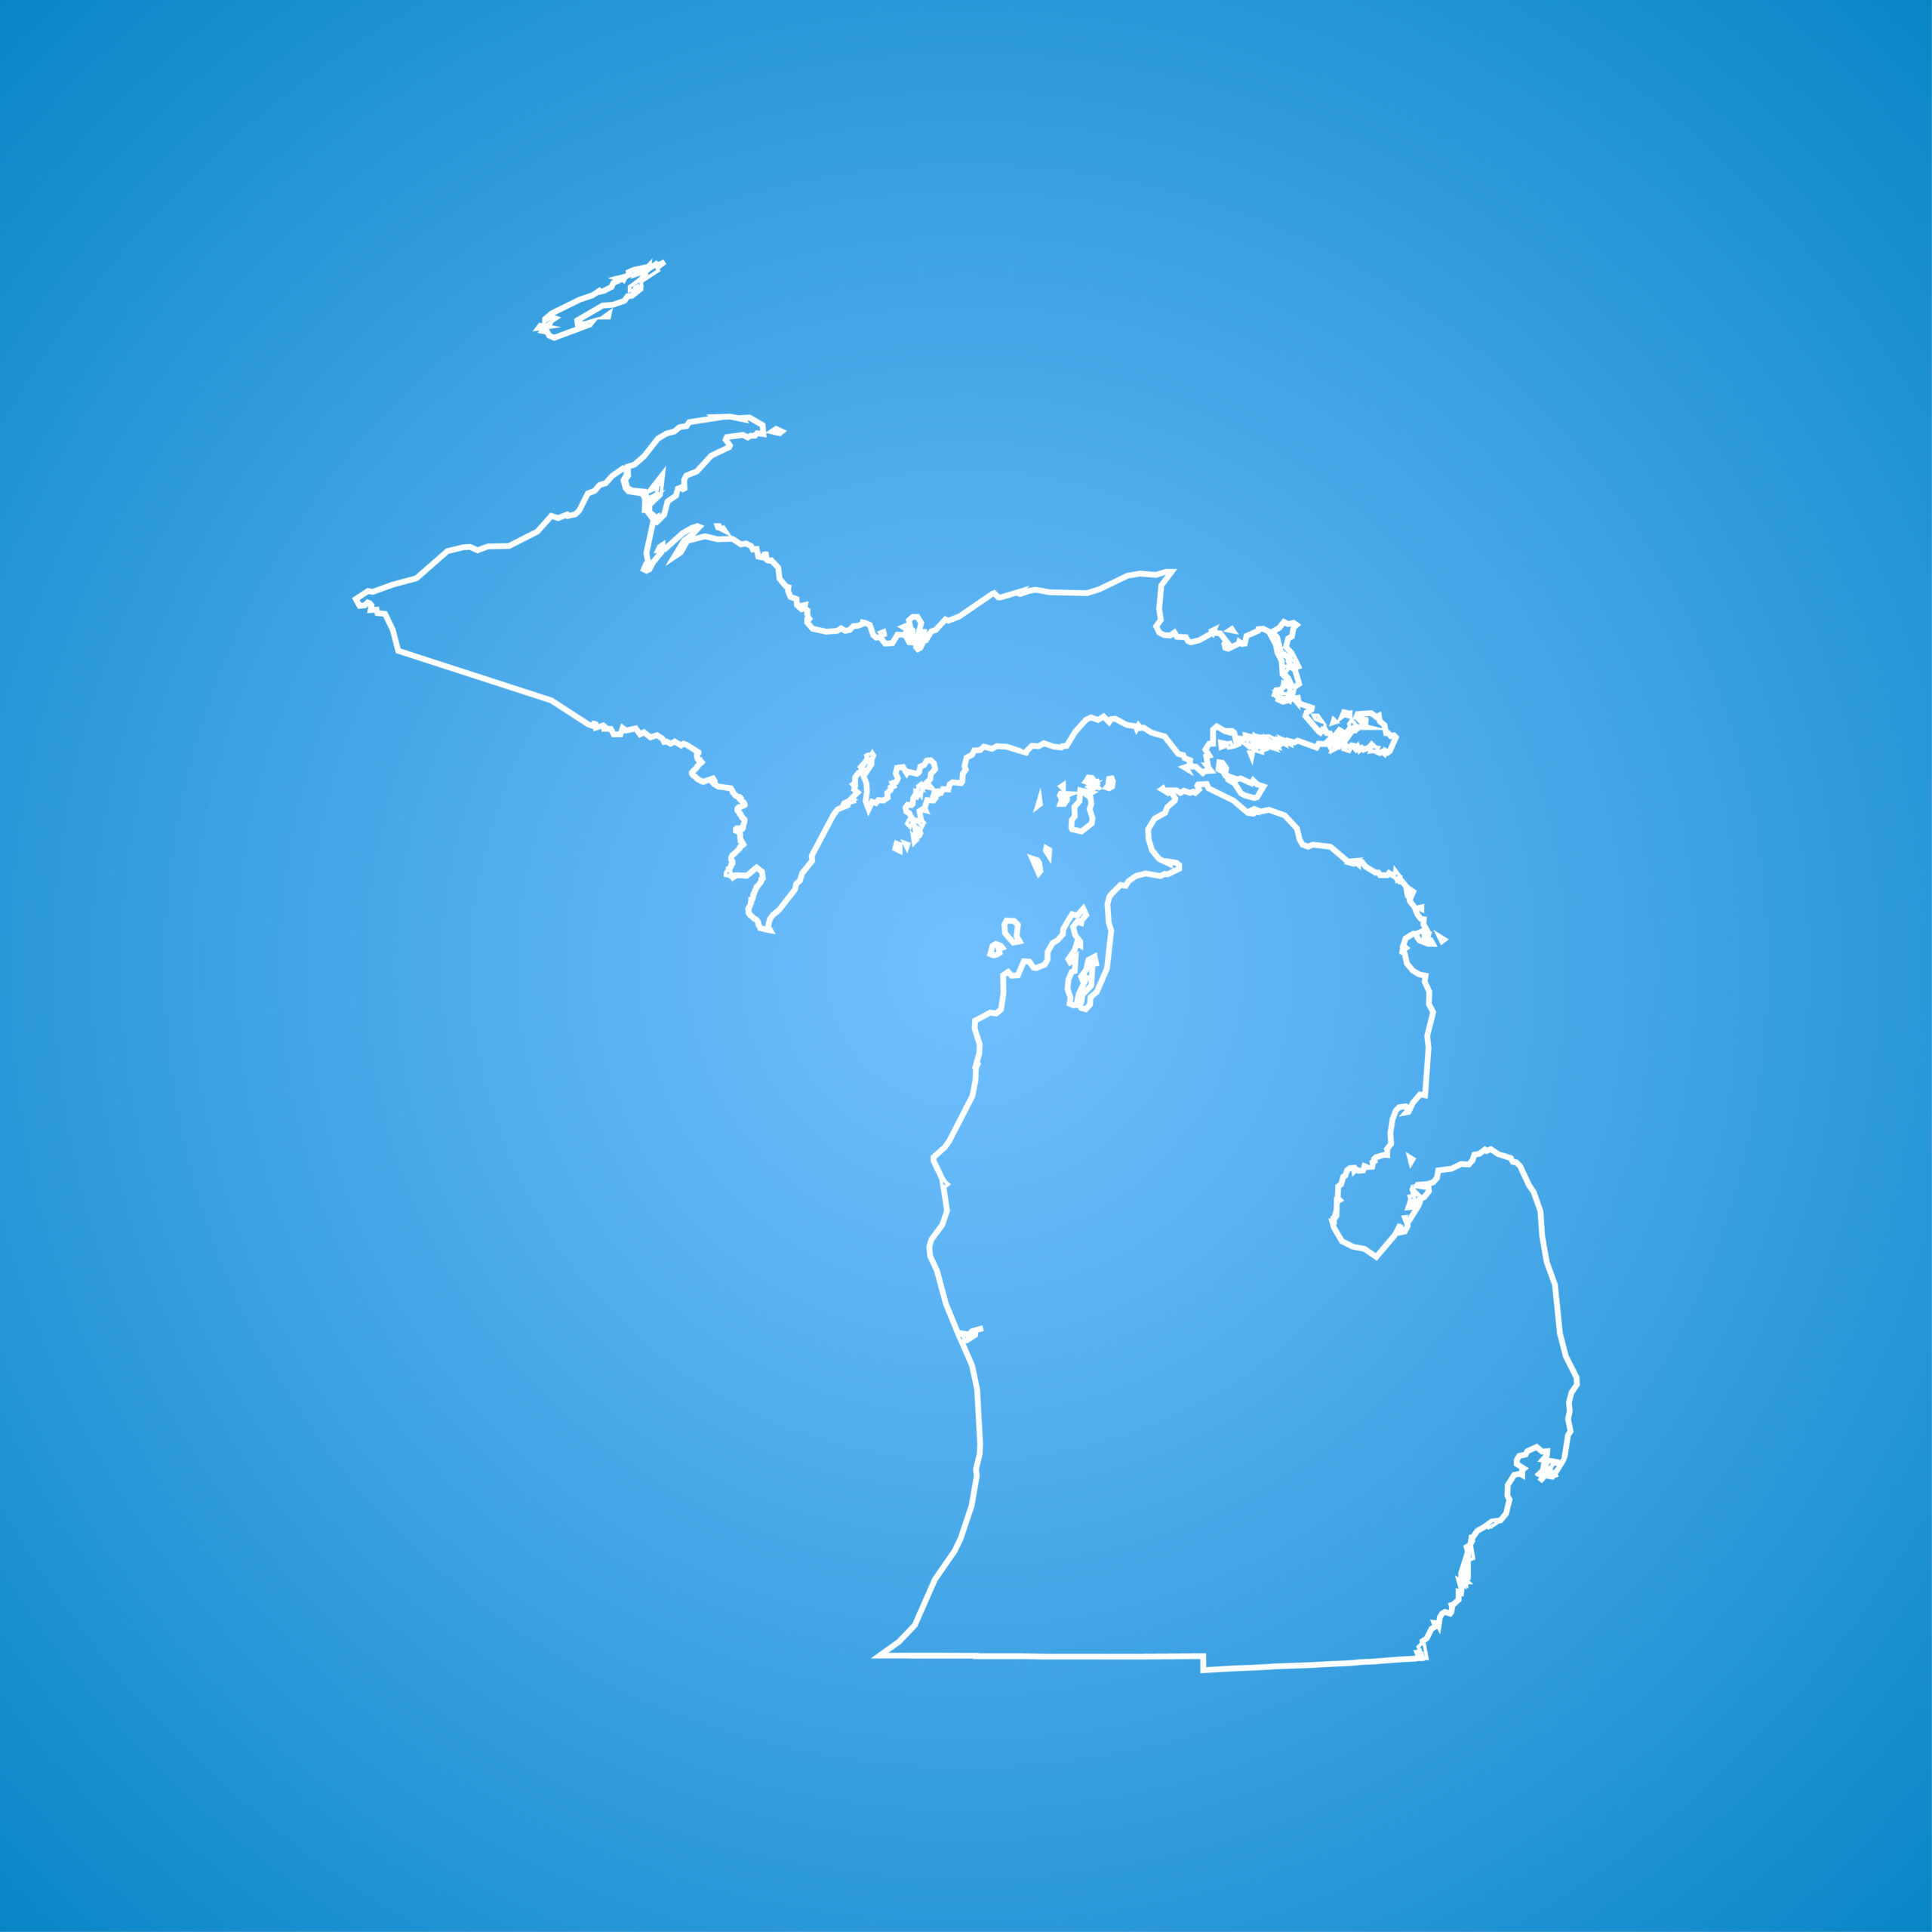 MI Releases New Data Tool for Students and Workers